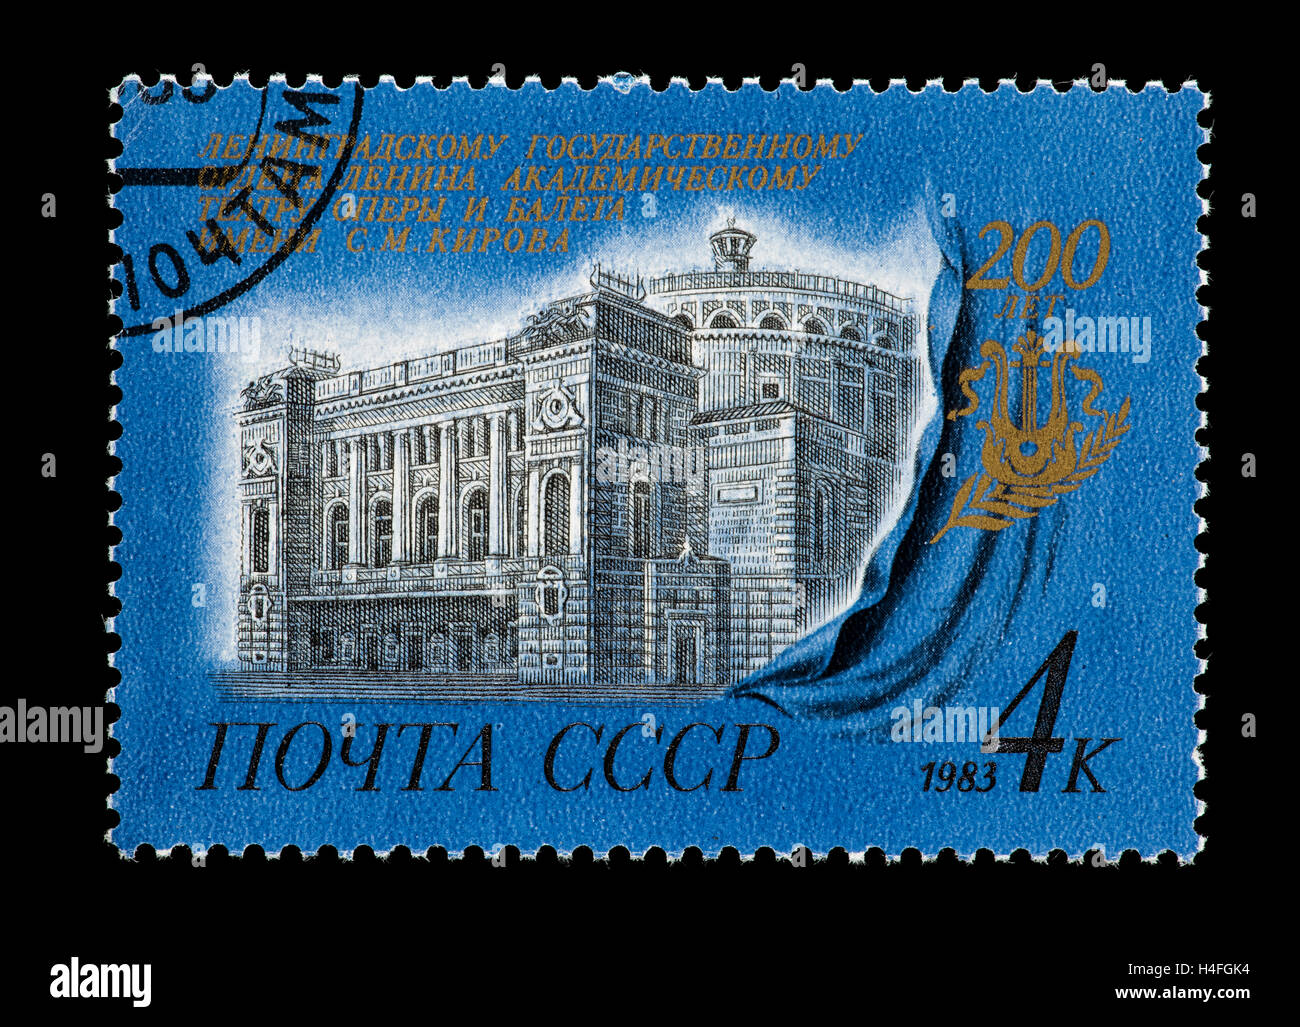 Postage stamp from the Soviet Union depicting the Kirov Opera and Ballet Theater in Leningrad, bicentennial. Stock Photo